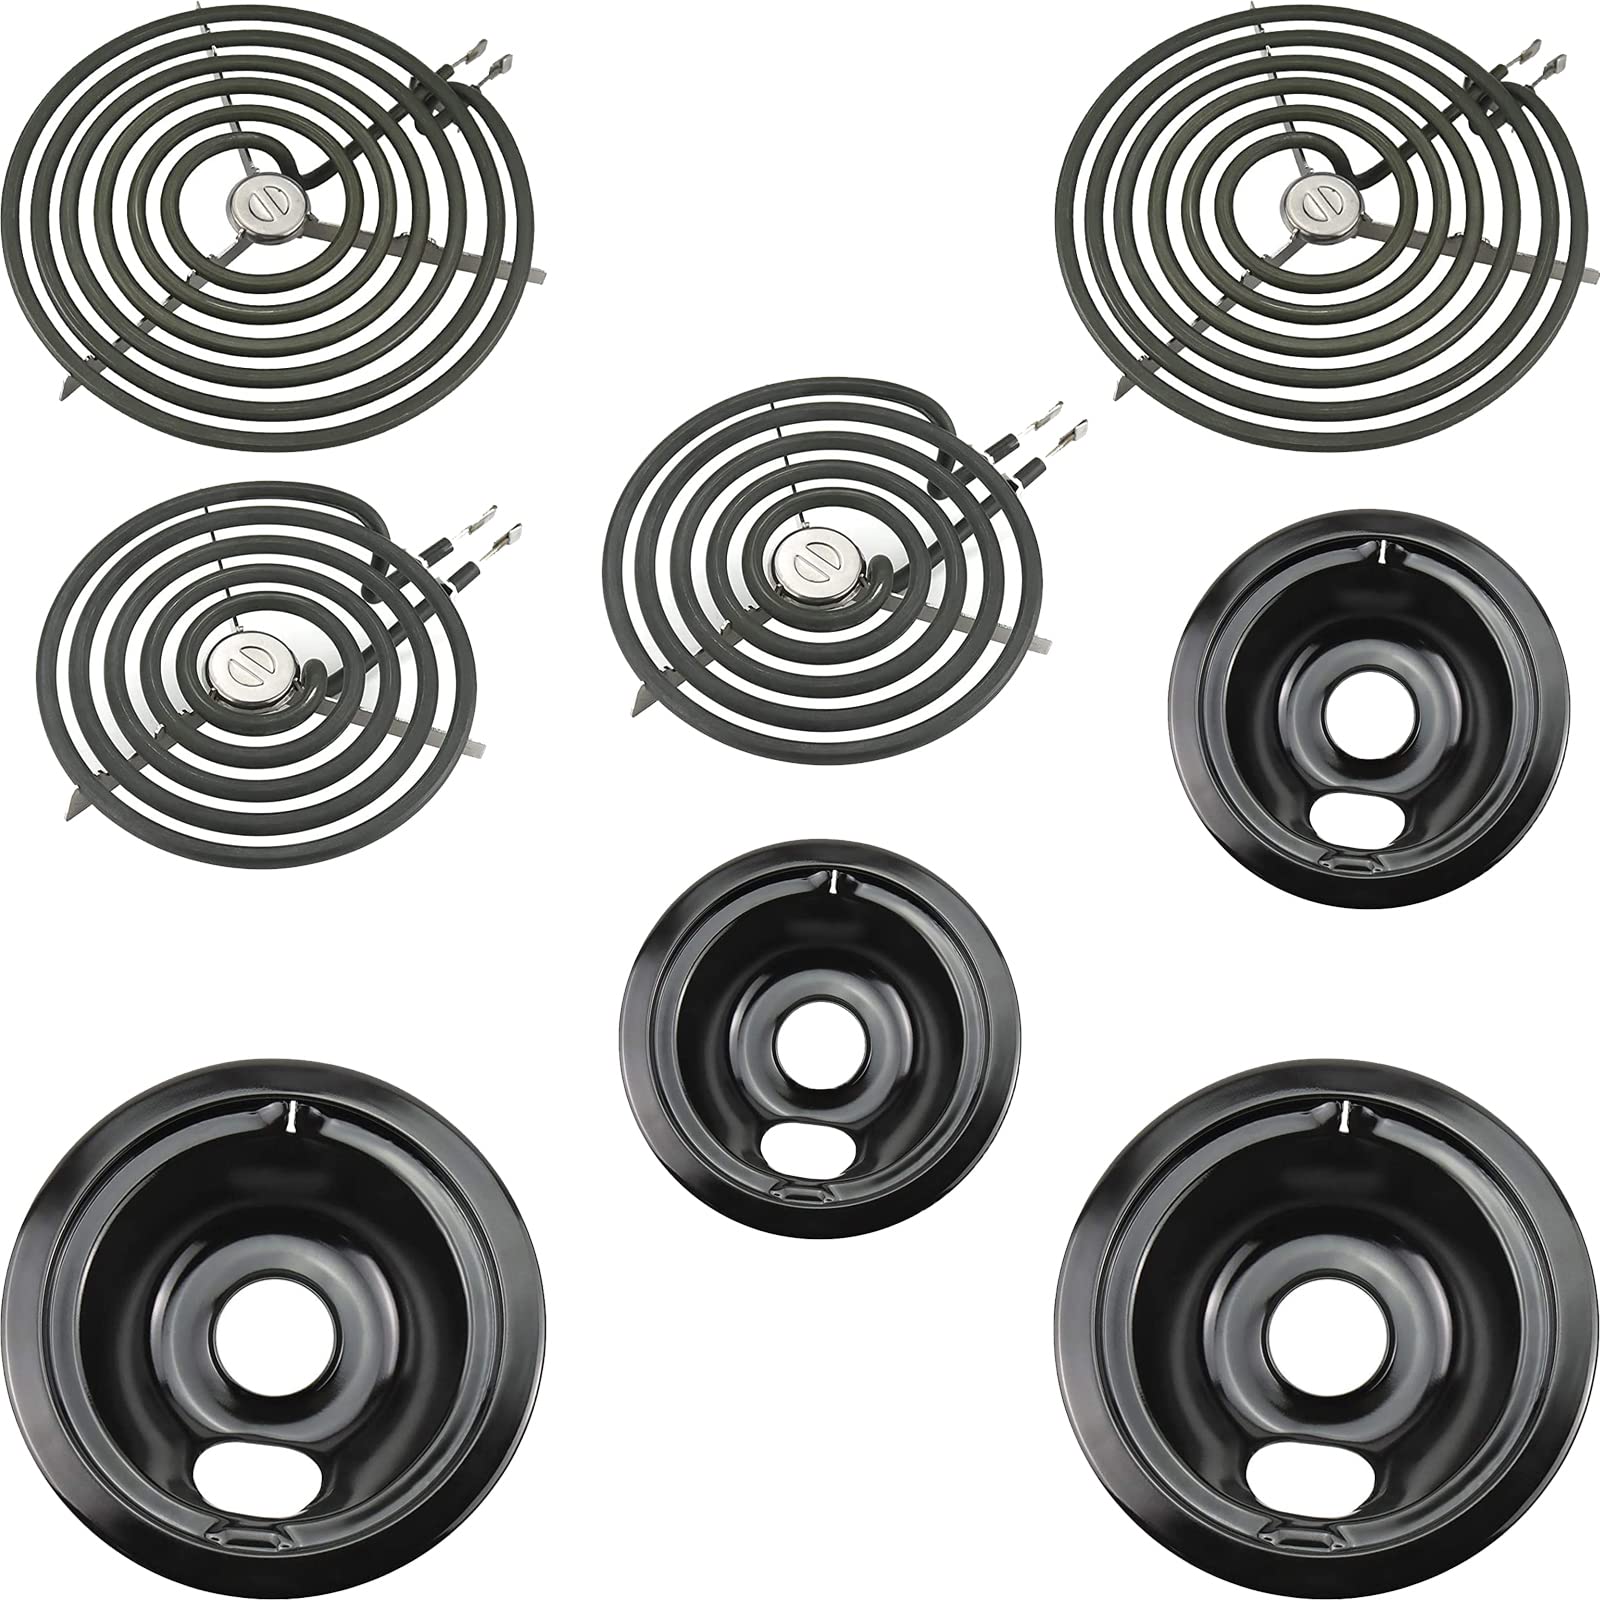 Blutoget WB31M20 WB31M19 Porcelain Drip Pans and WB30M1 WB30M2 Electric Range Stove Burner Kit by Blutoget- Replacement for gE Hotpoint R